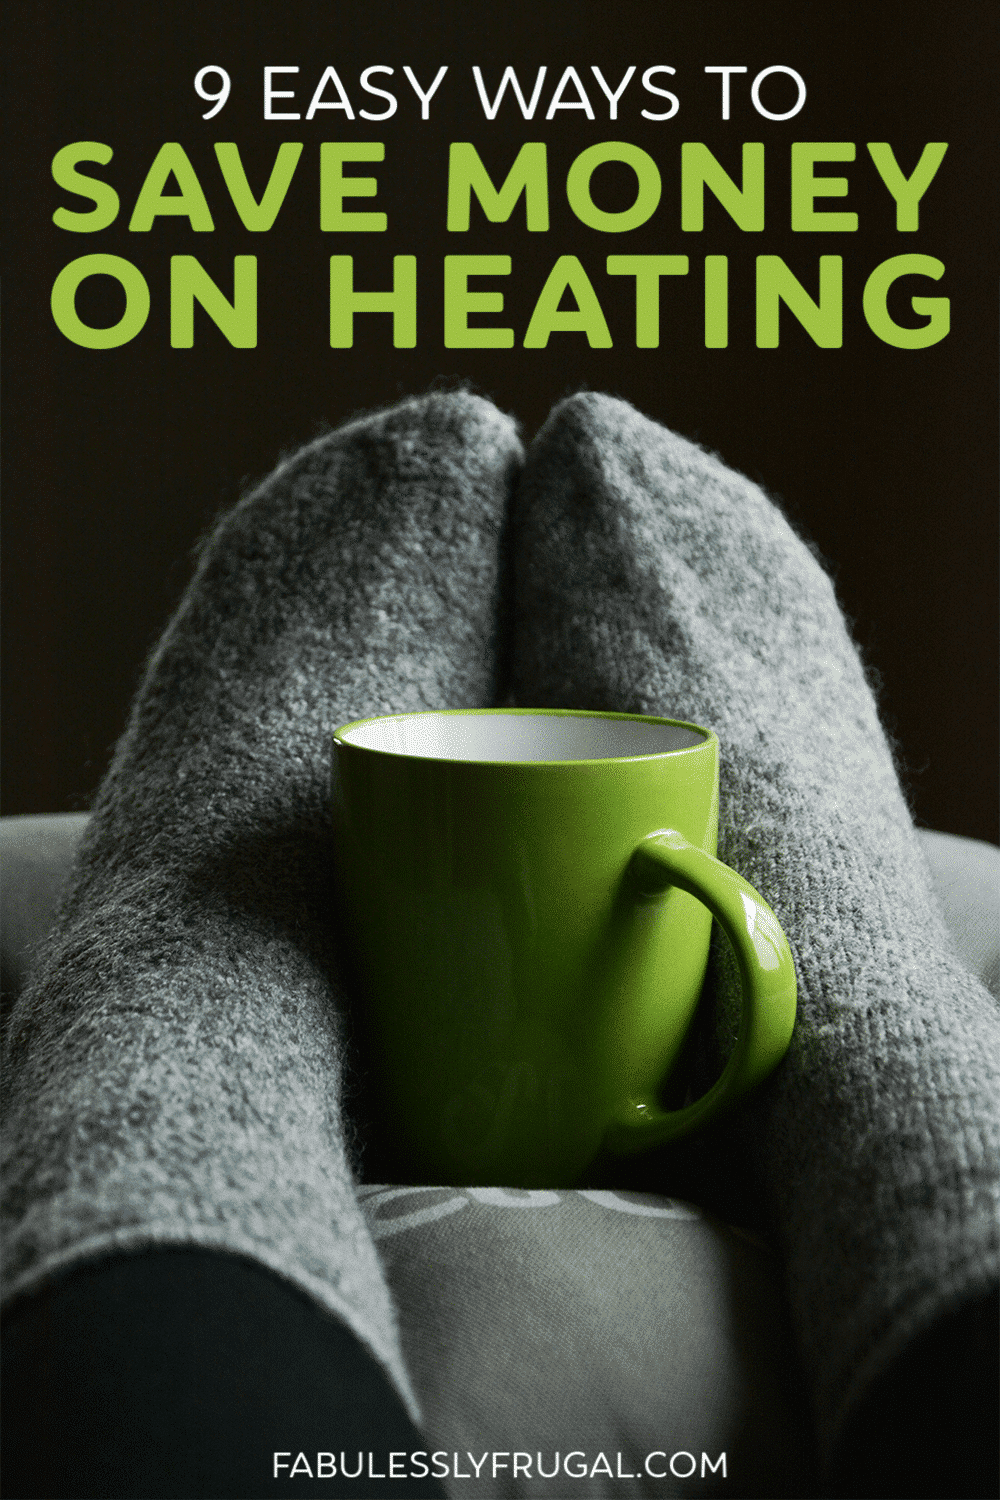 How to save money on heating